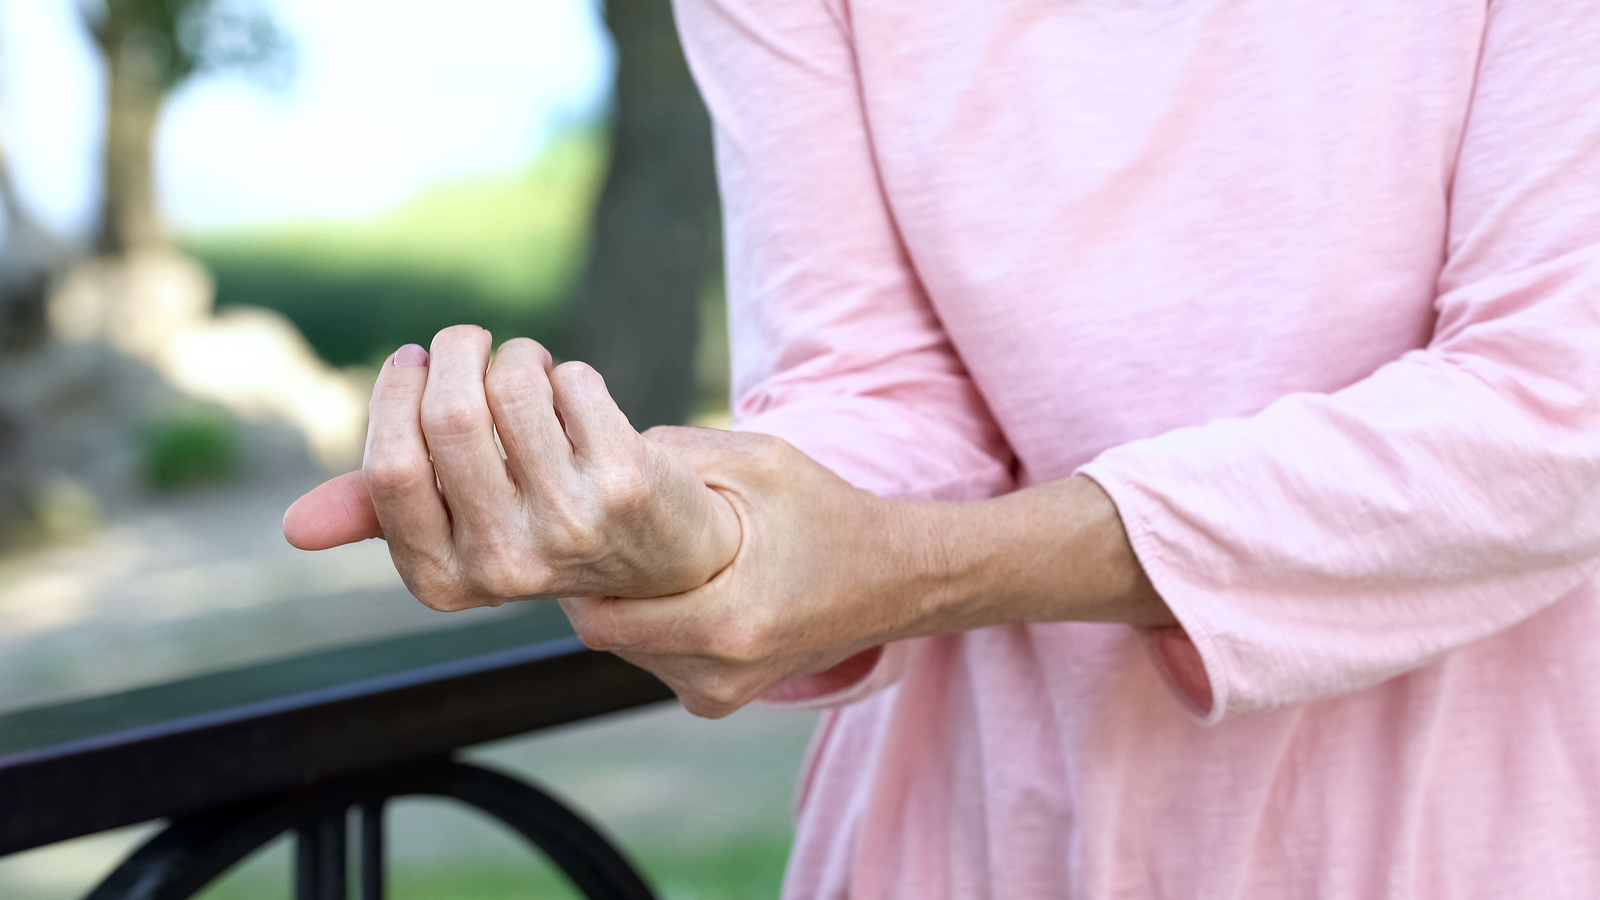 Old Woman Stretching Numb Arm, Weakness Of Muscles In Senior Age